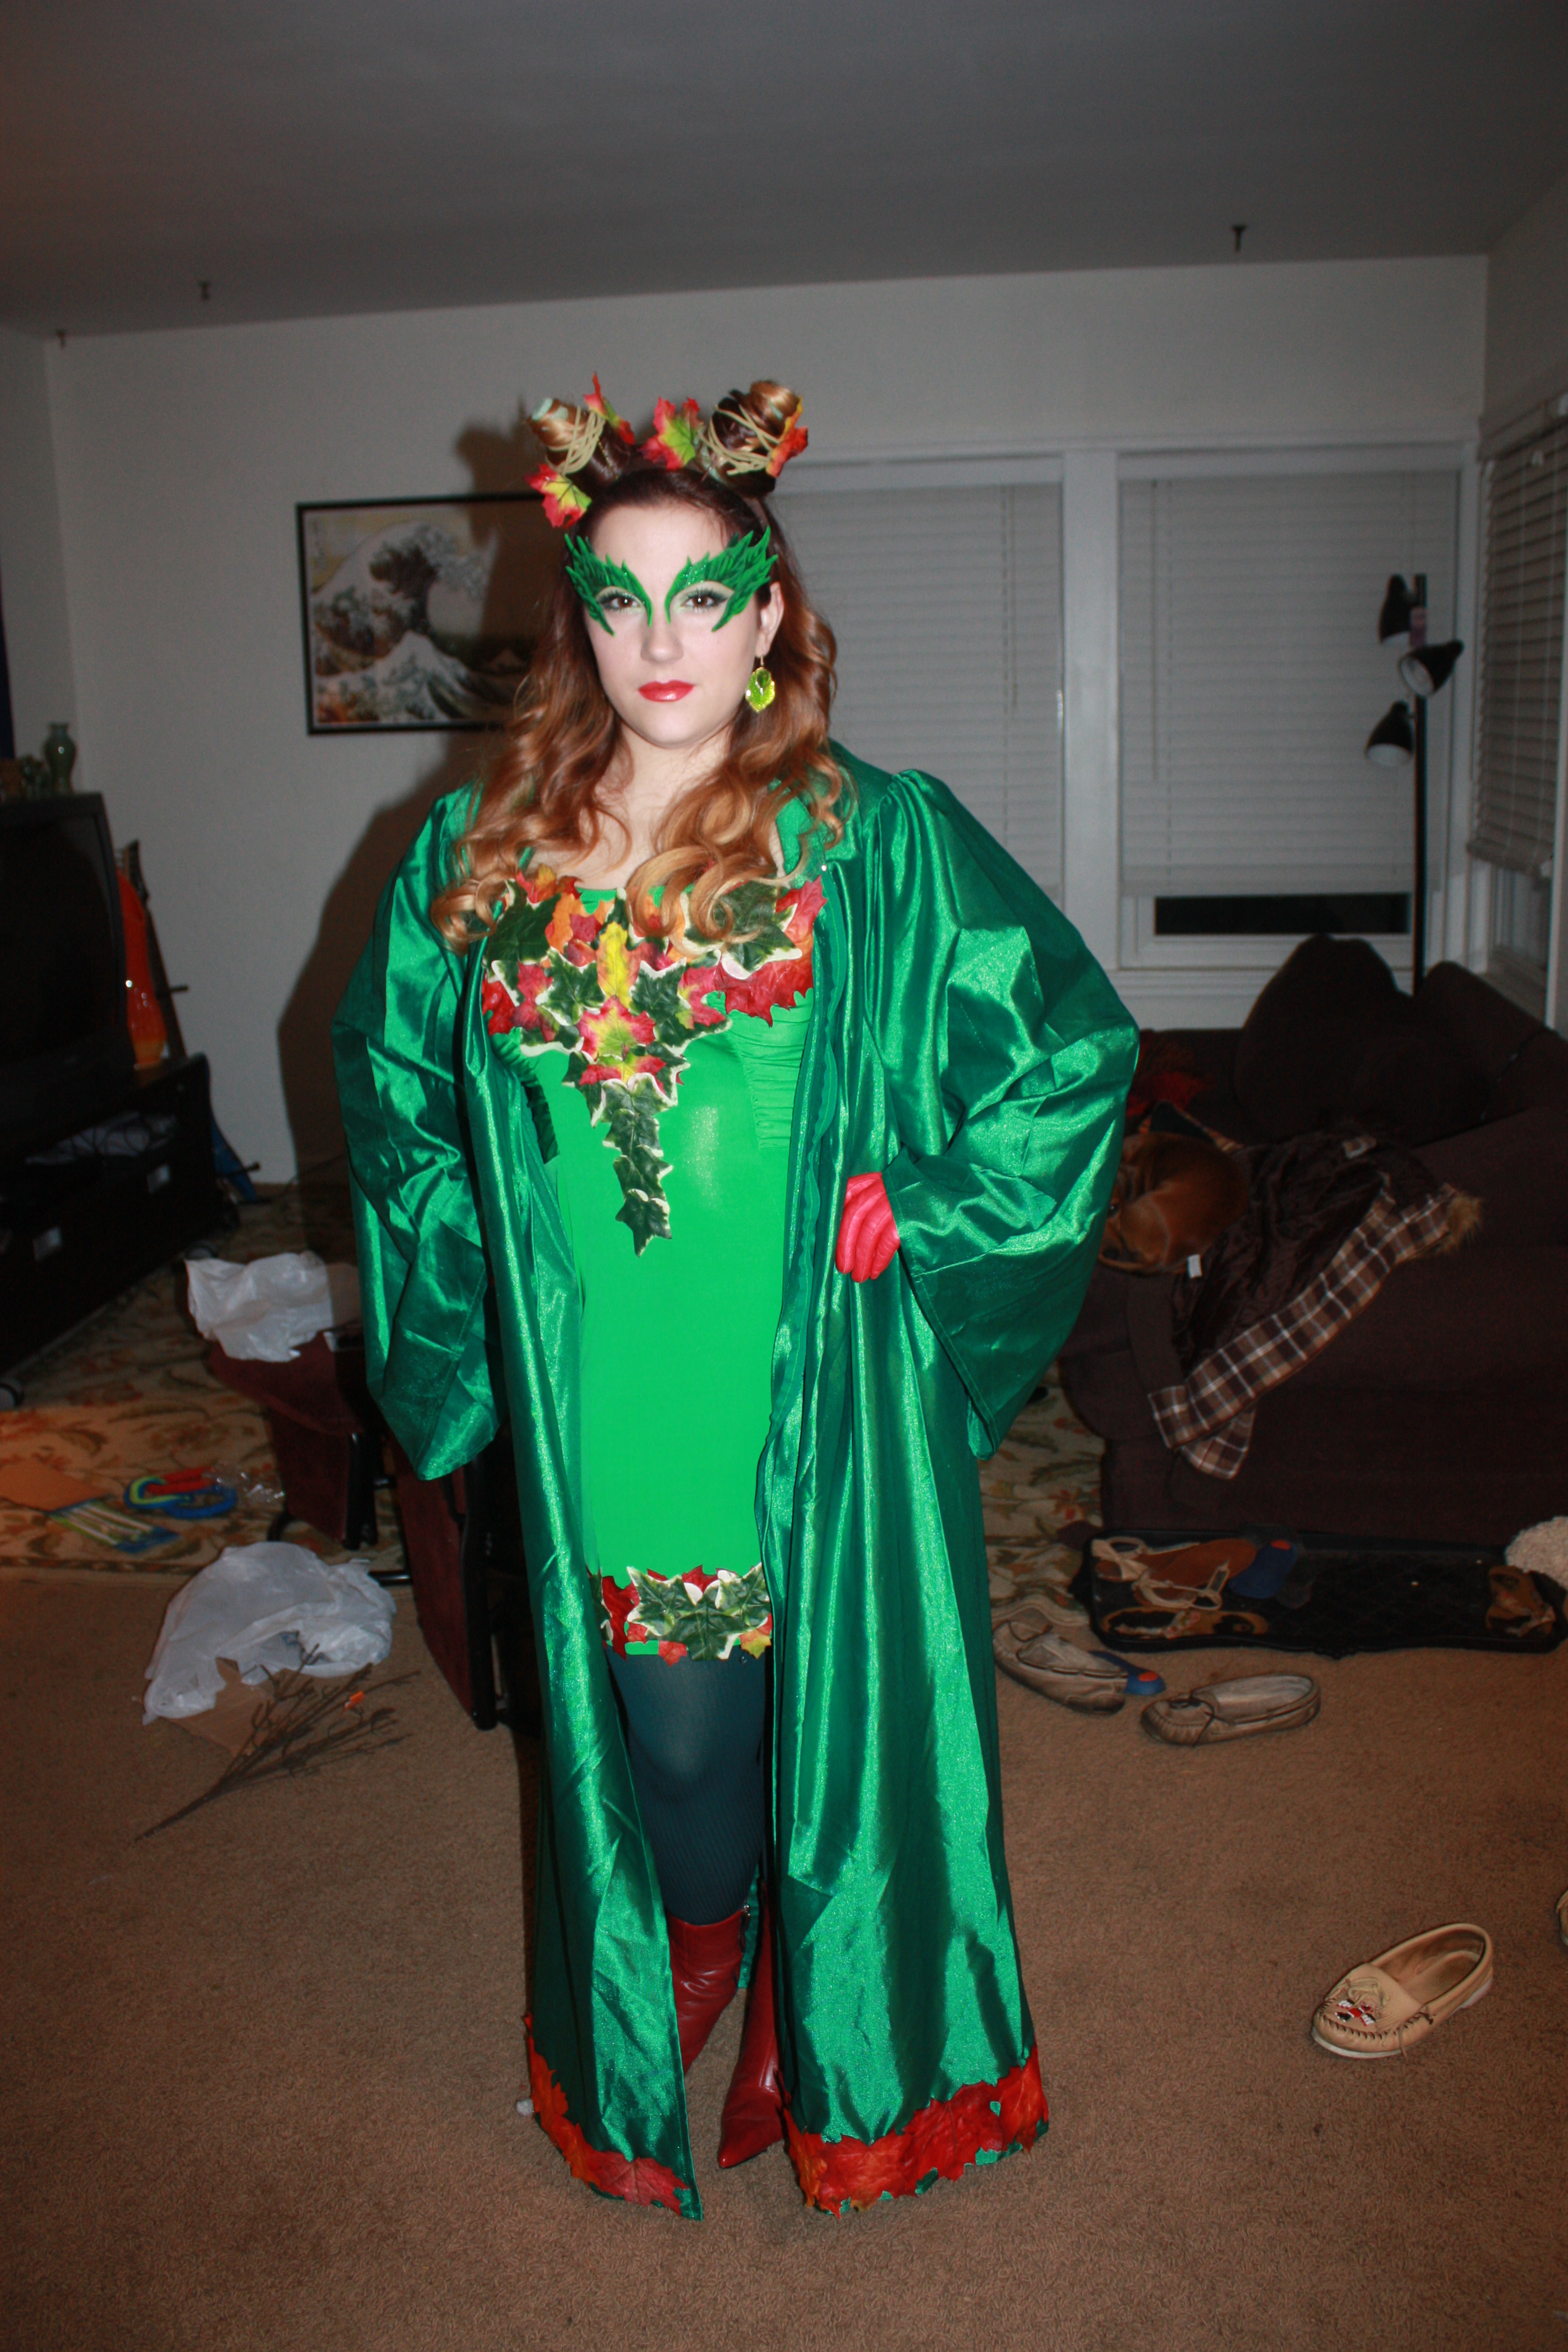 Awesome Poison Ivy character costume